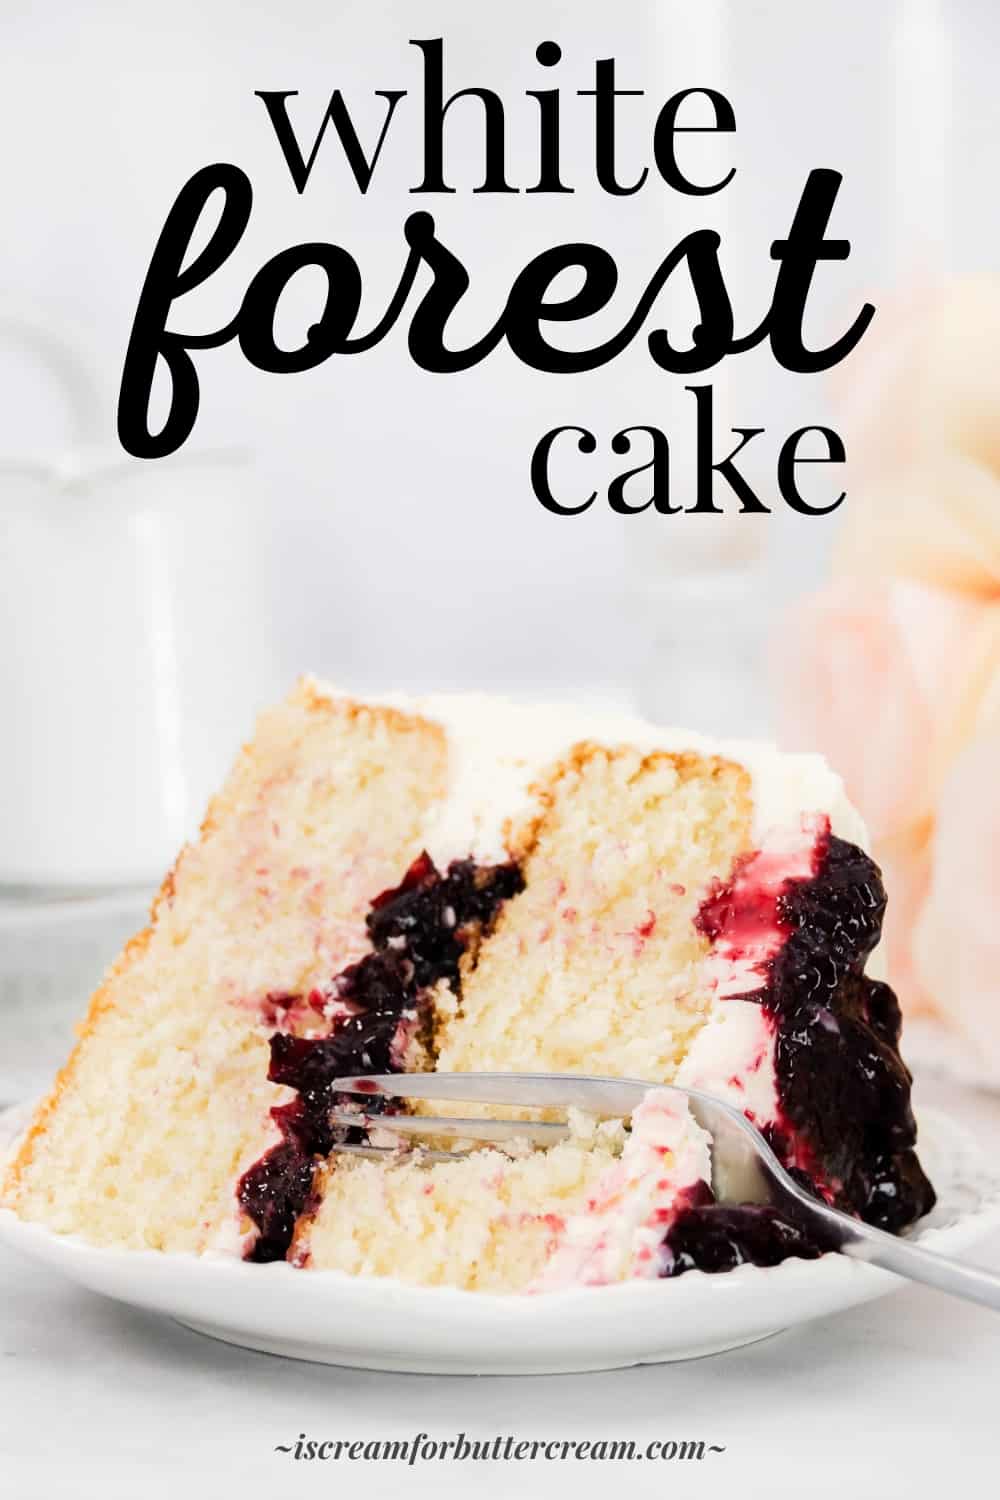 Tall image of slice of white forest cake laying on its side on a white plate with text overlay.